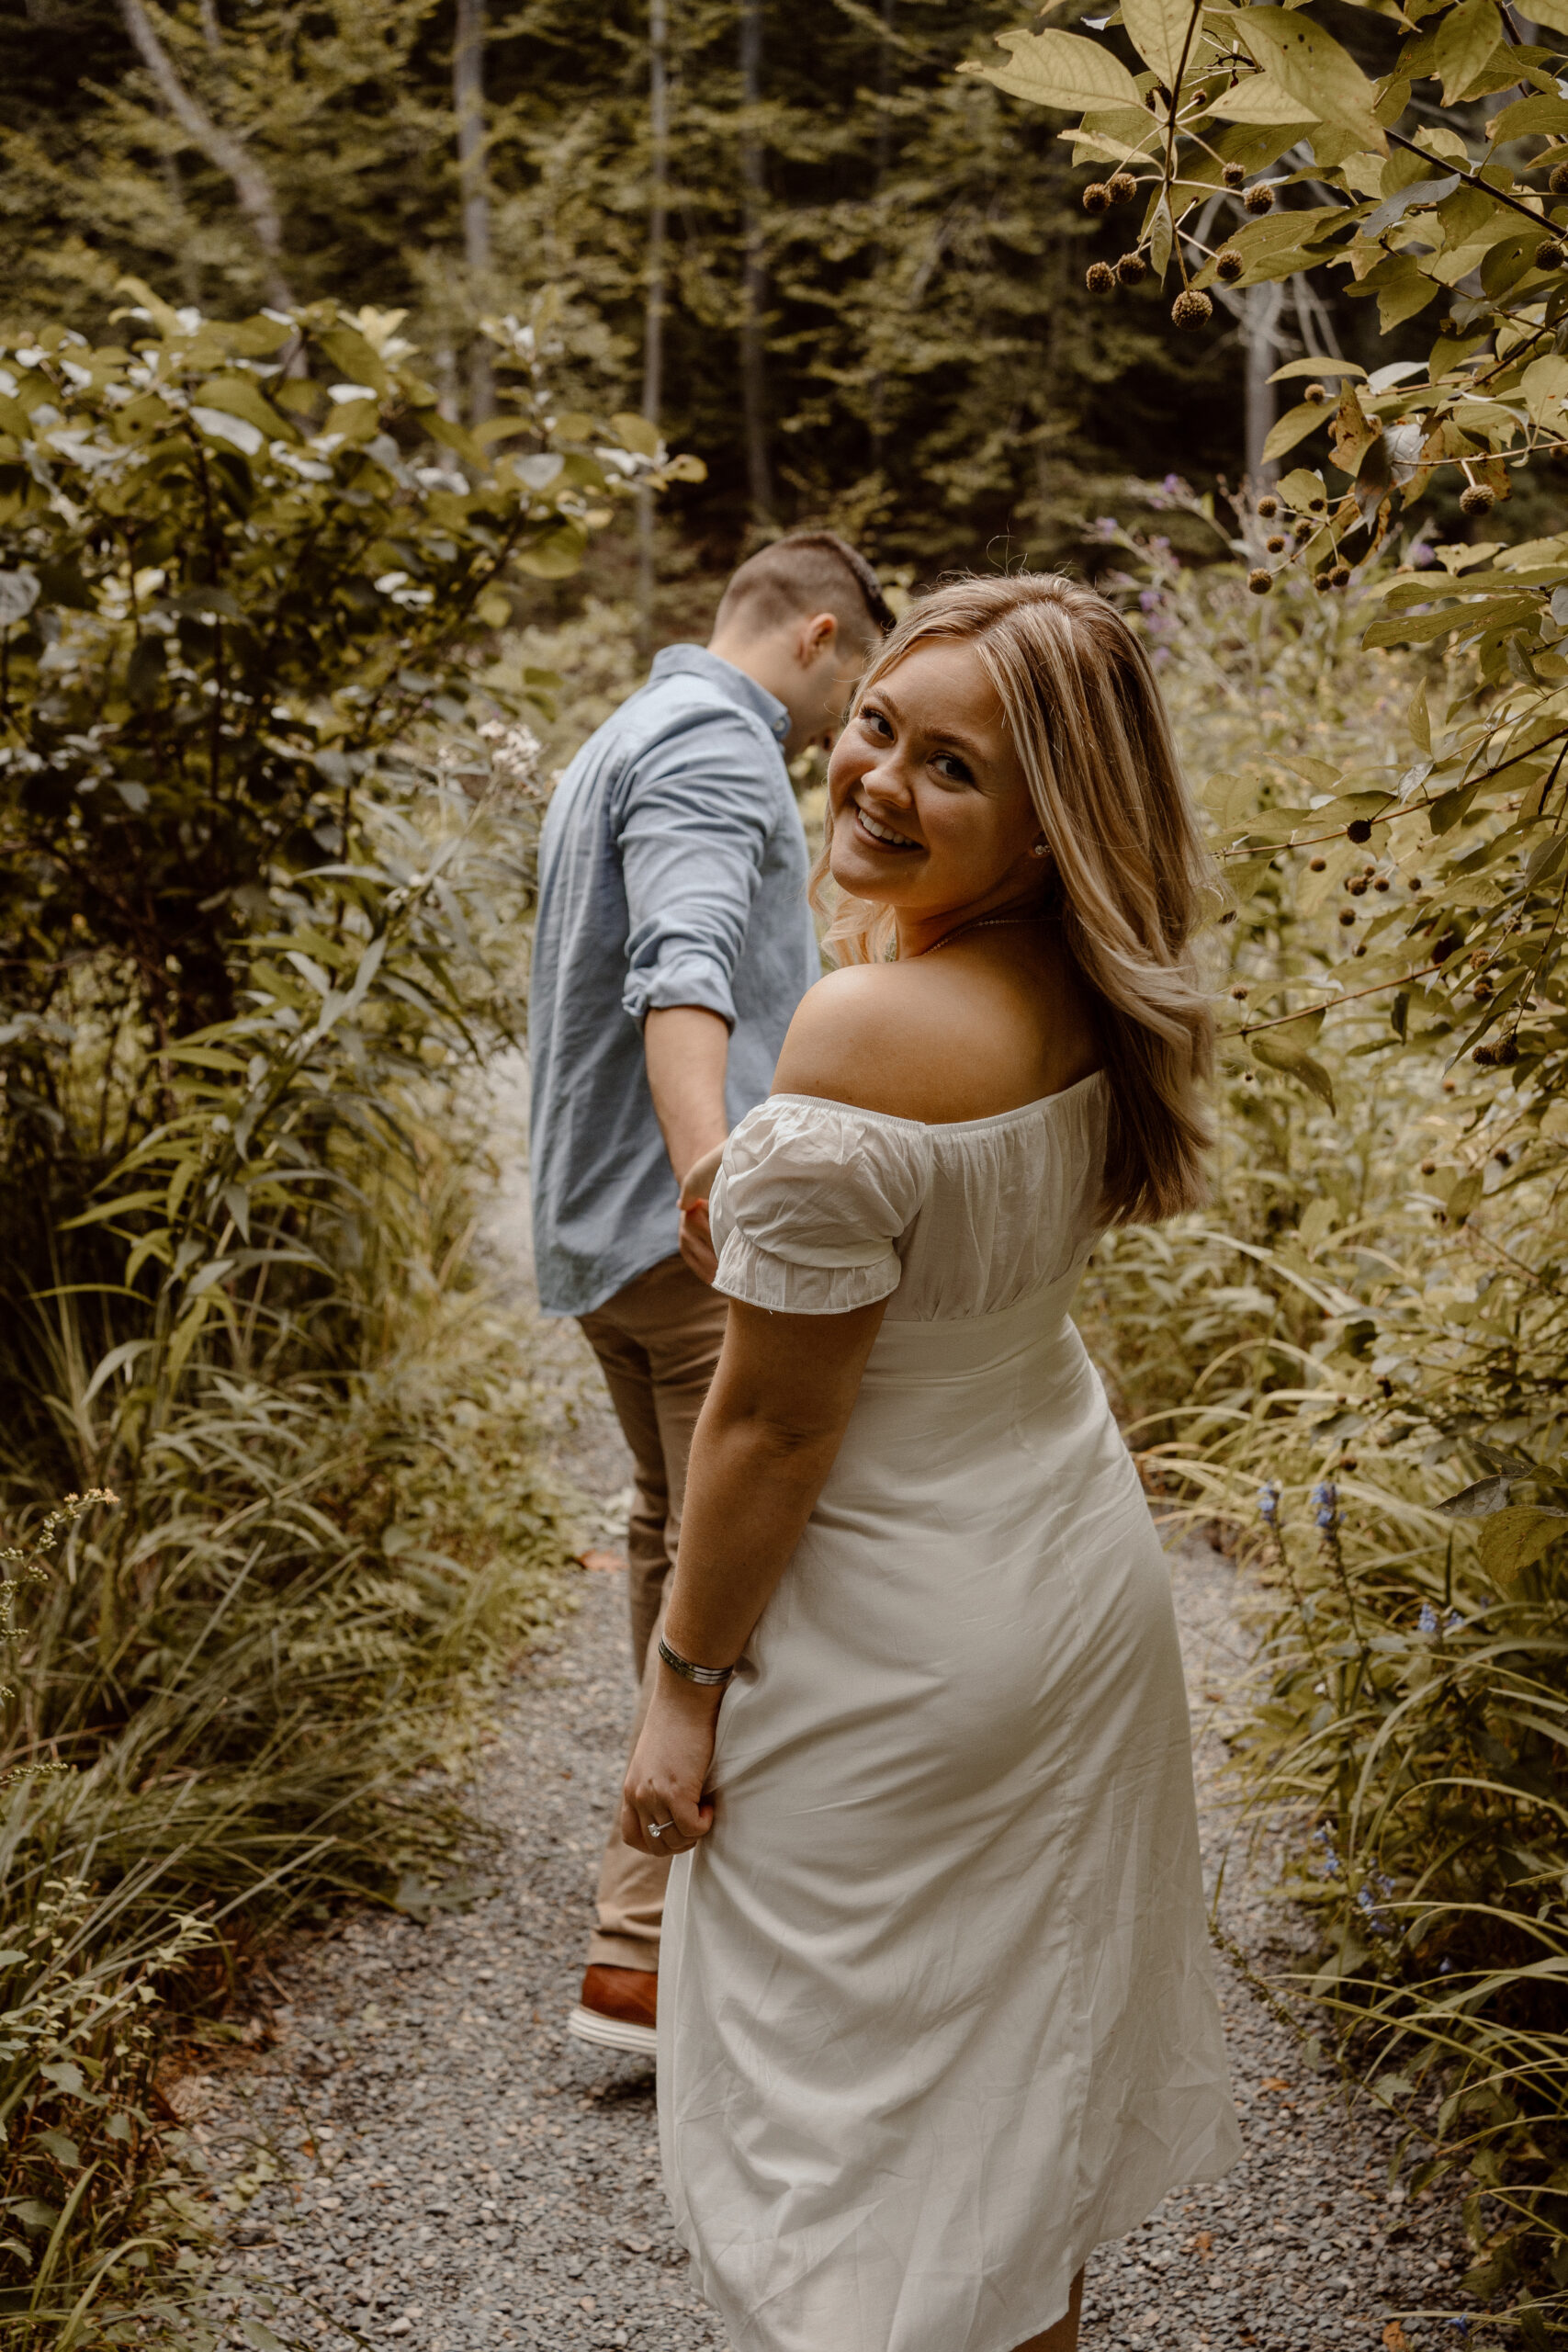 Hand in hand, a couple explores a woodland path, their laughter echoing through the Garden in The Woods in Framingham, MA during their engagement photo session.